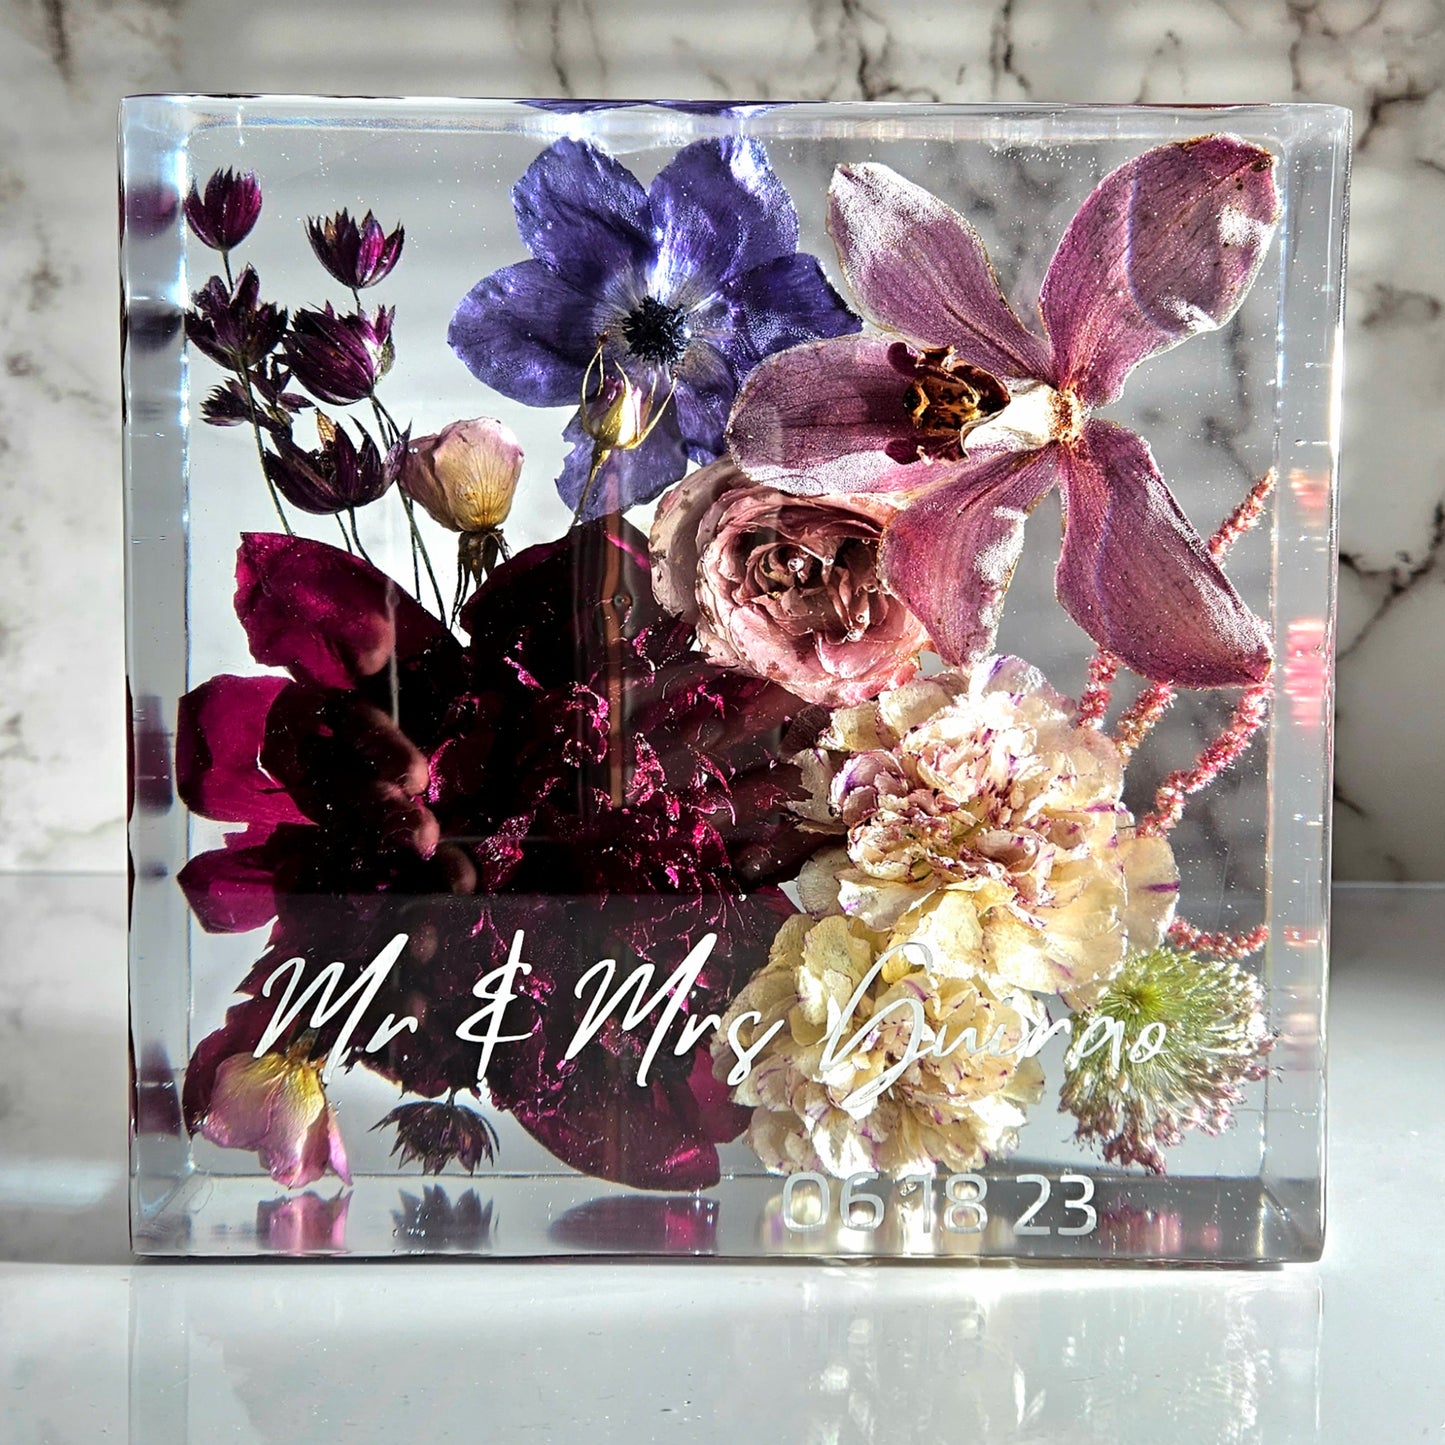 8"x 8" Square Luxury 3D Floral Resin Cube Wedding Bouquet Preservation Modern Fried Flowers Square Save Your Gift Keepsake